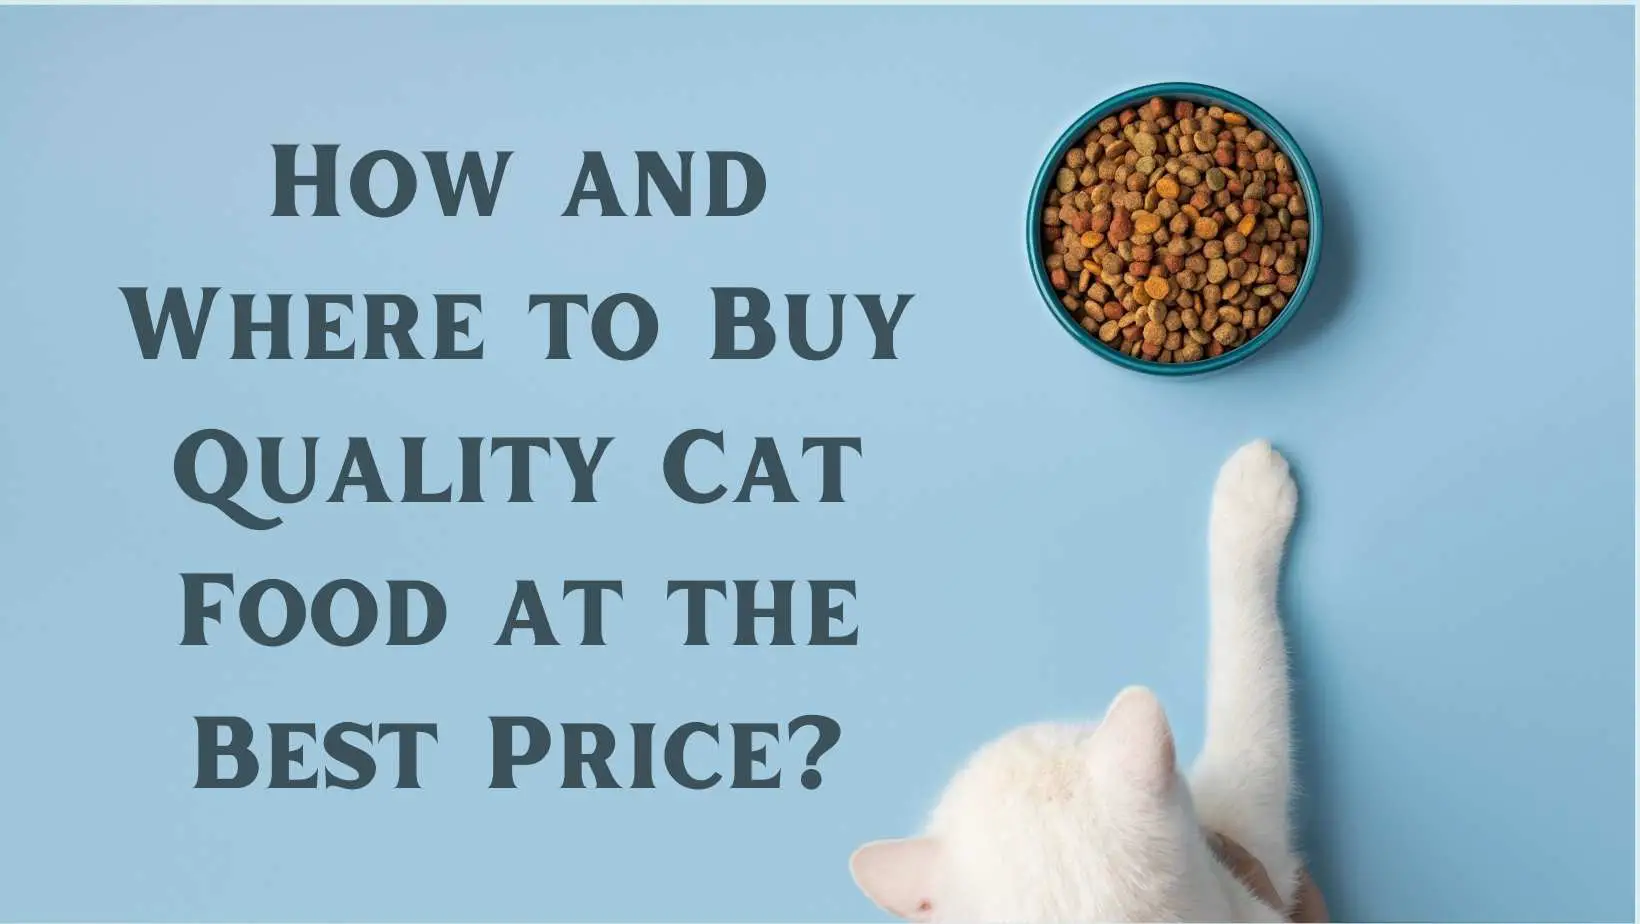 How and Where to Buy Quality Cat Food at the Best Price